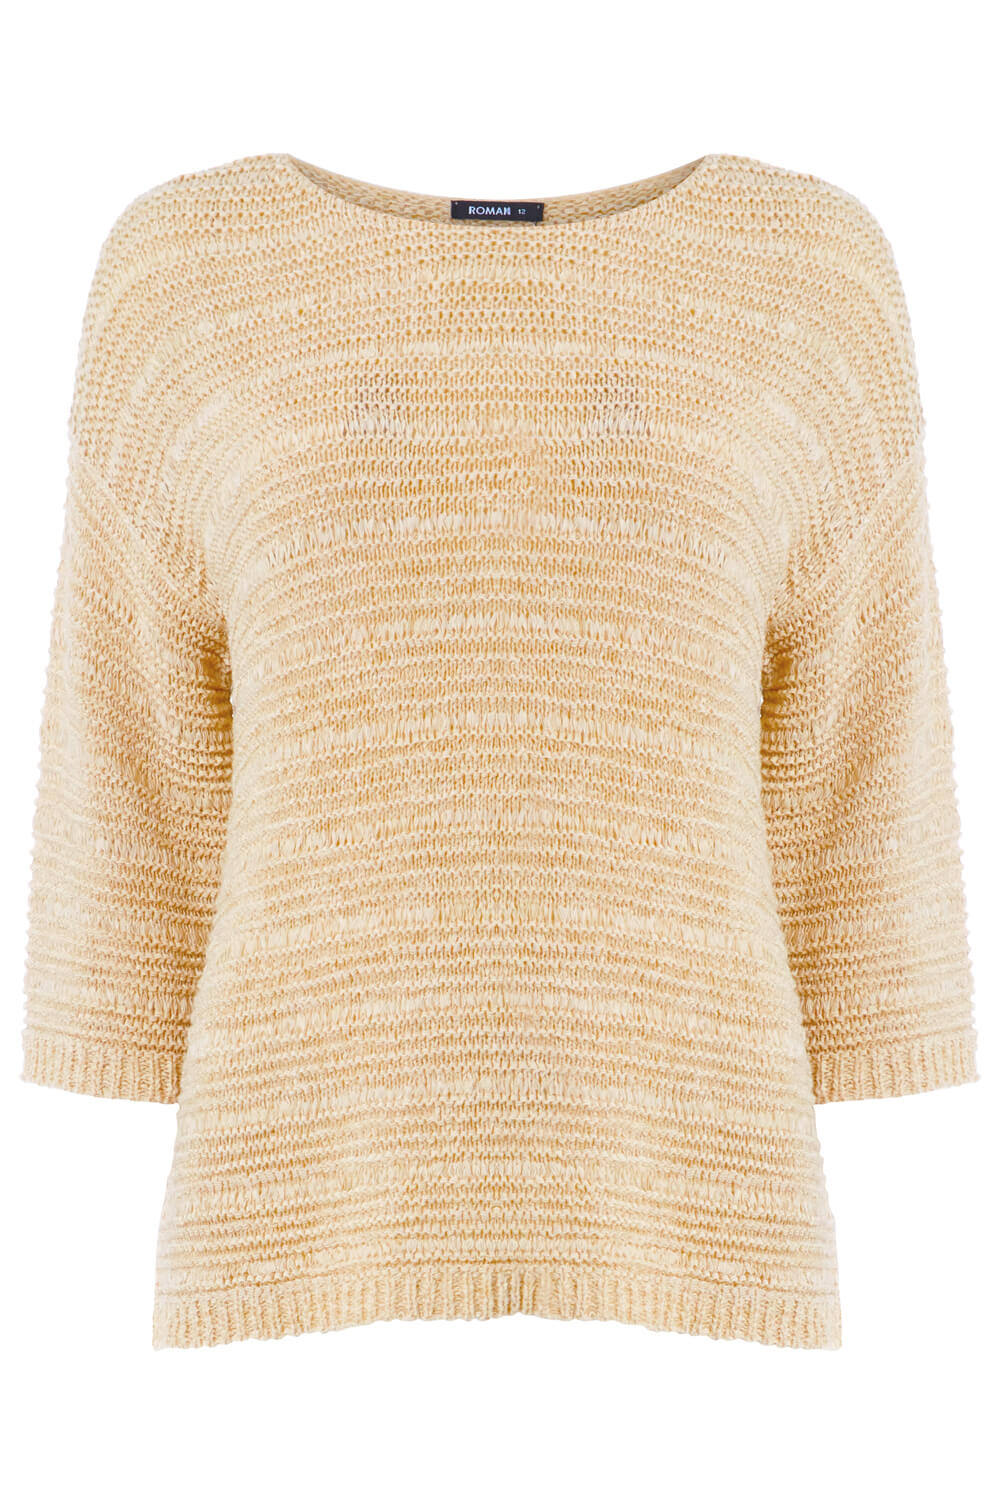 Stone Textured Tape Yarn Jumper, Image 5 of 5